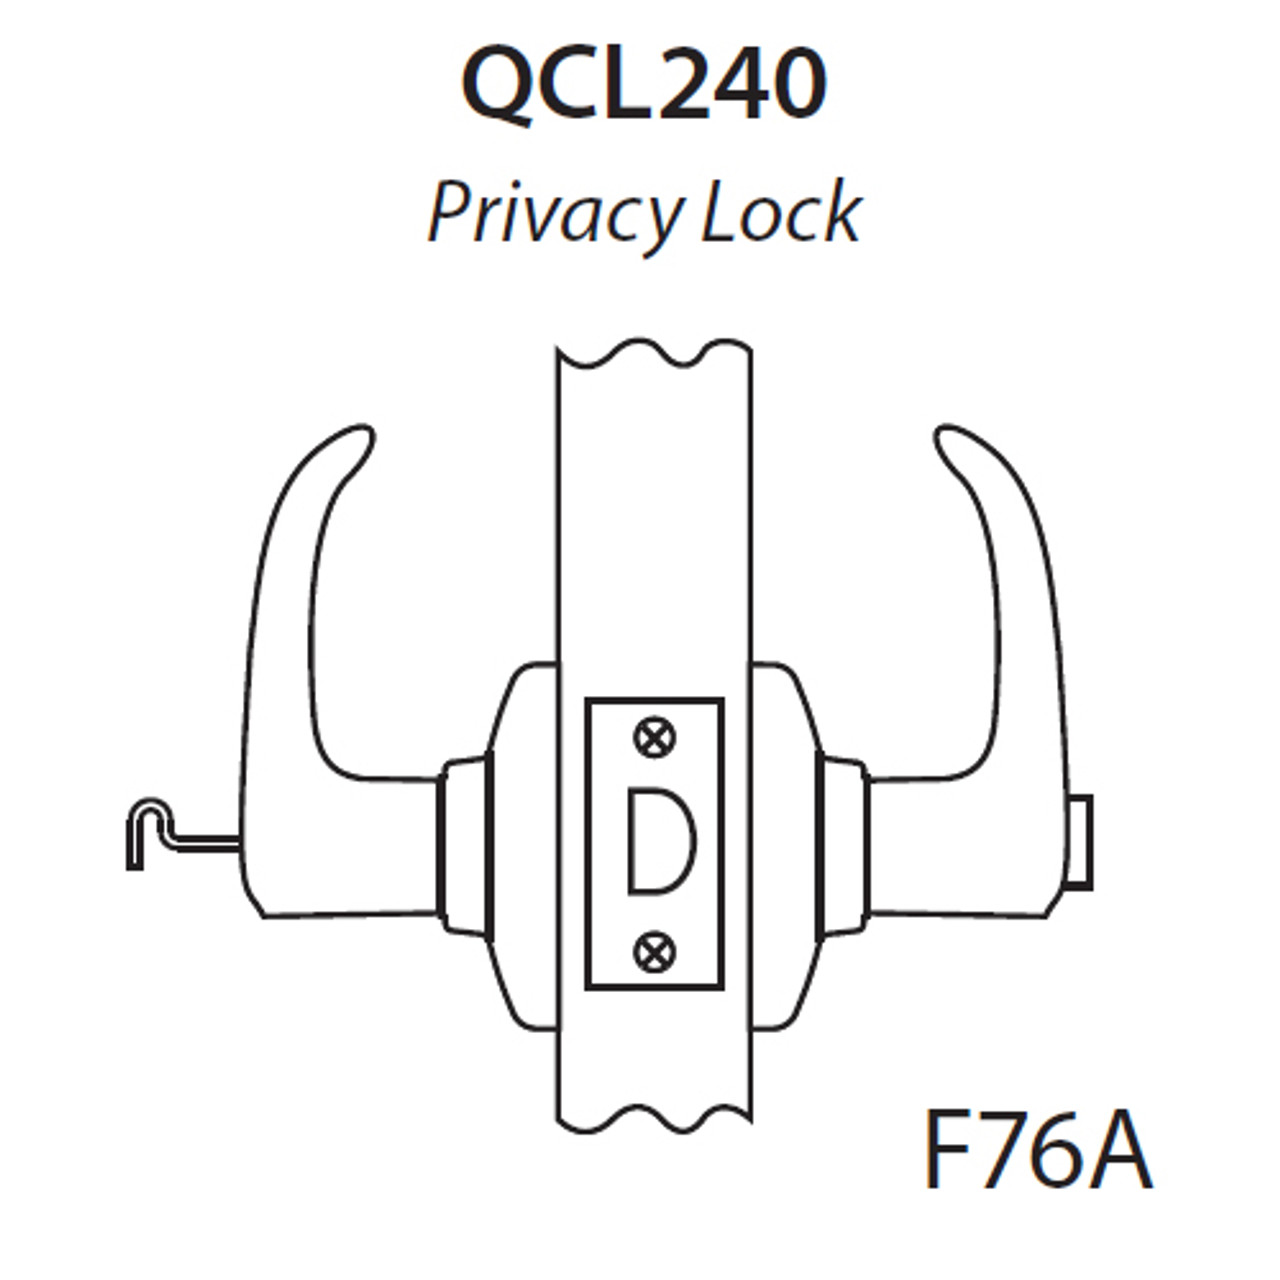 QCL240E613S3478S Stanley QCL200 Series Cylindrical Privacy Lock with Sierra Lever in Oil Rubbed Bronze